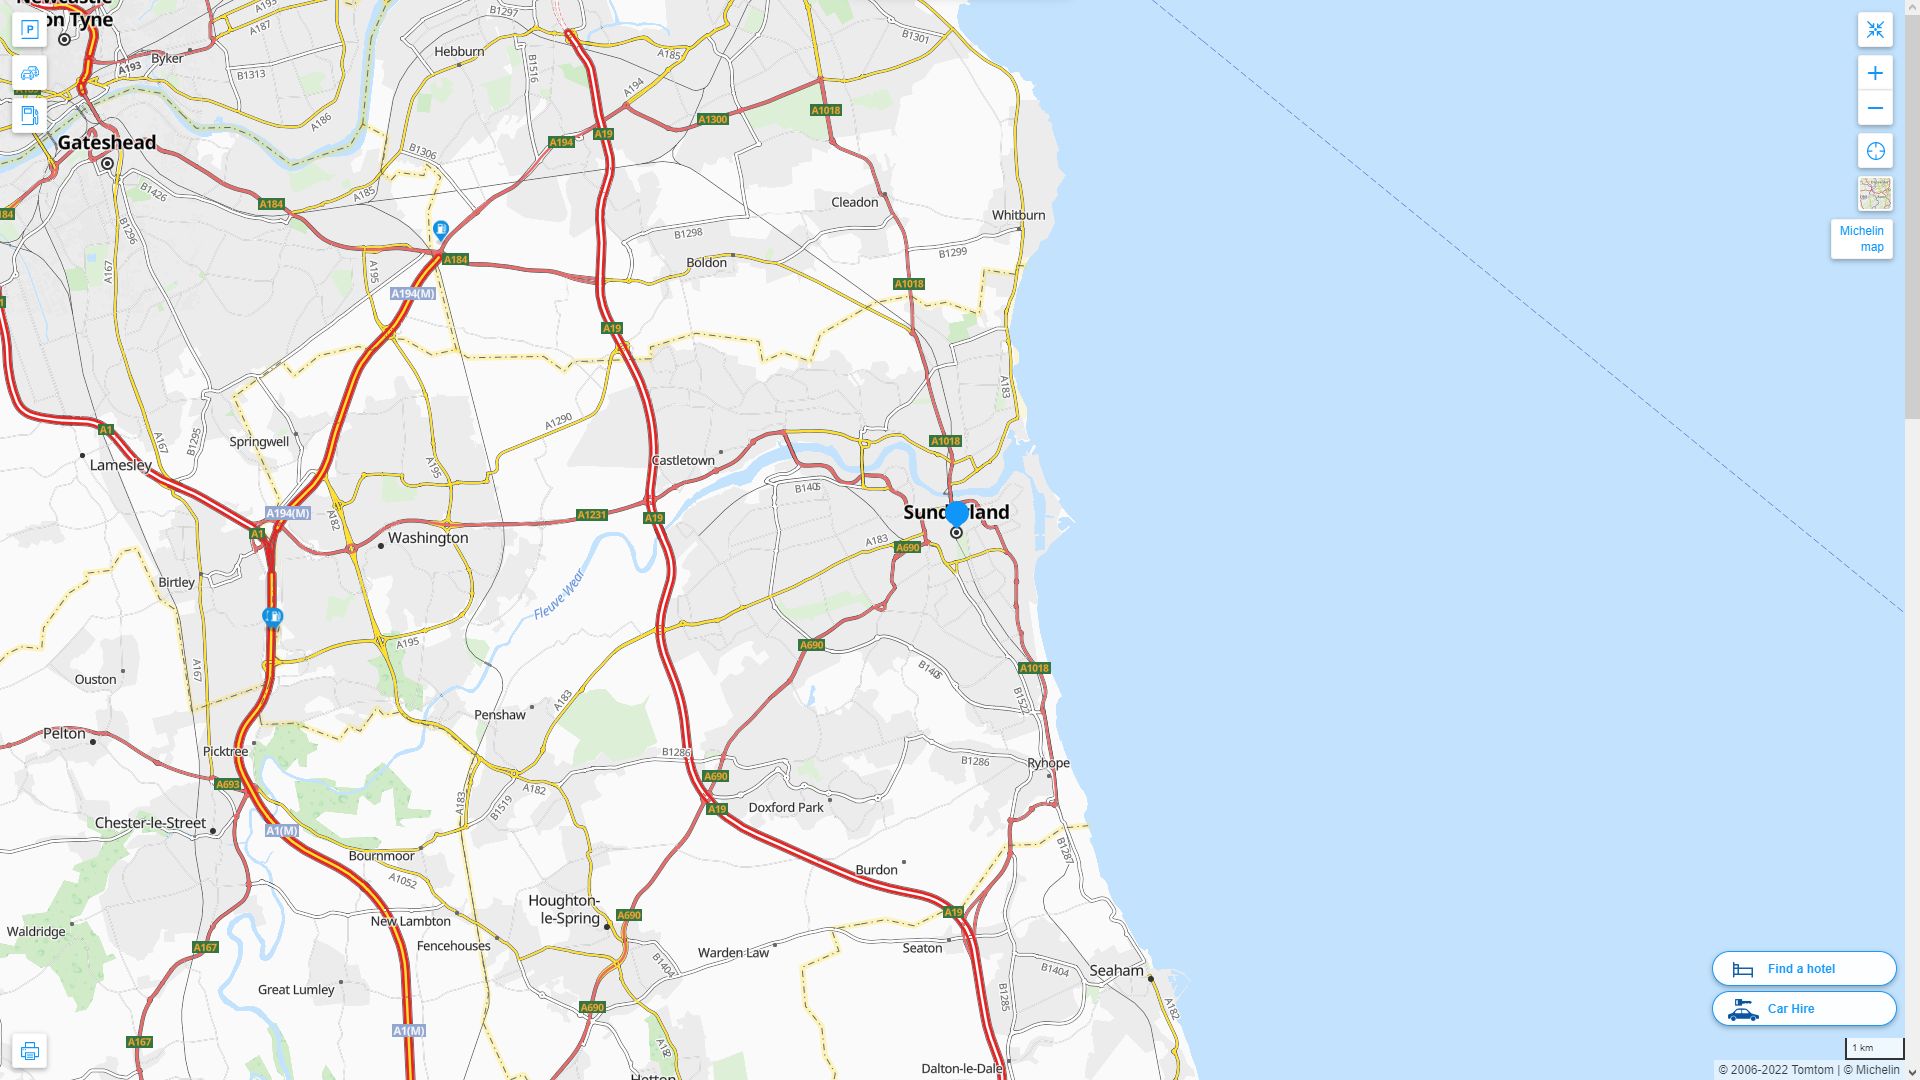 Sunderland Highway and Road Map